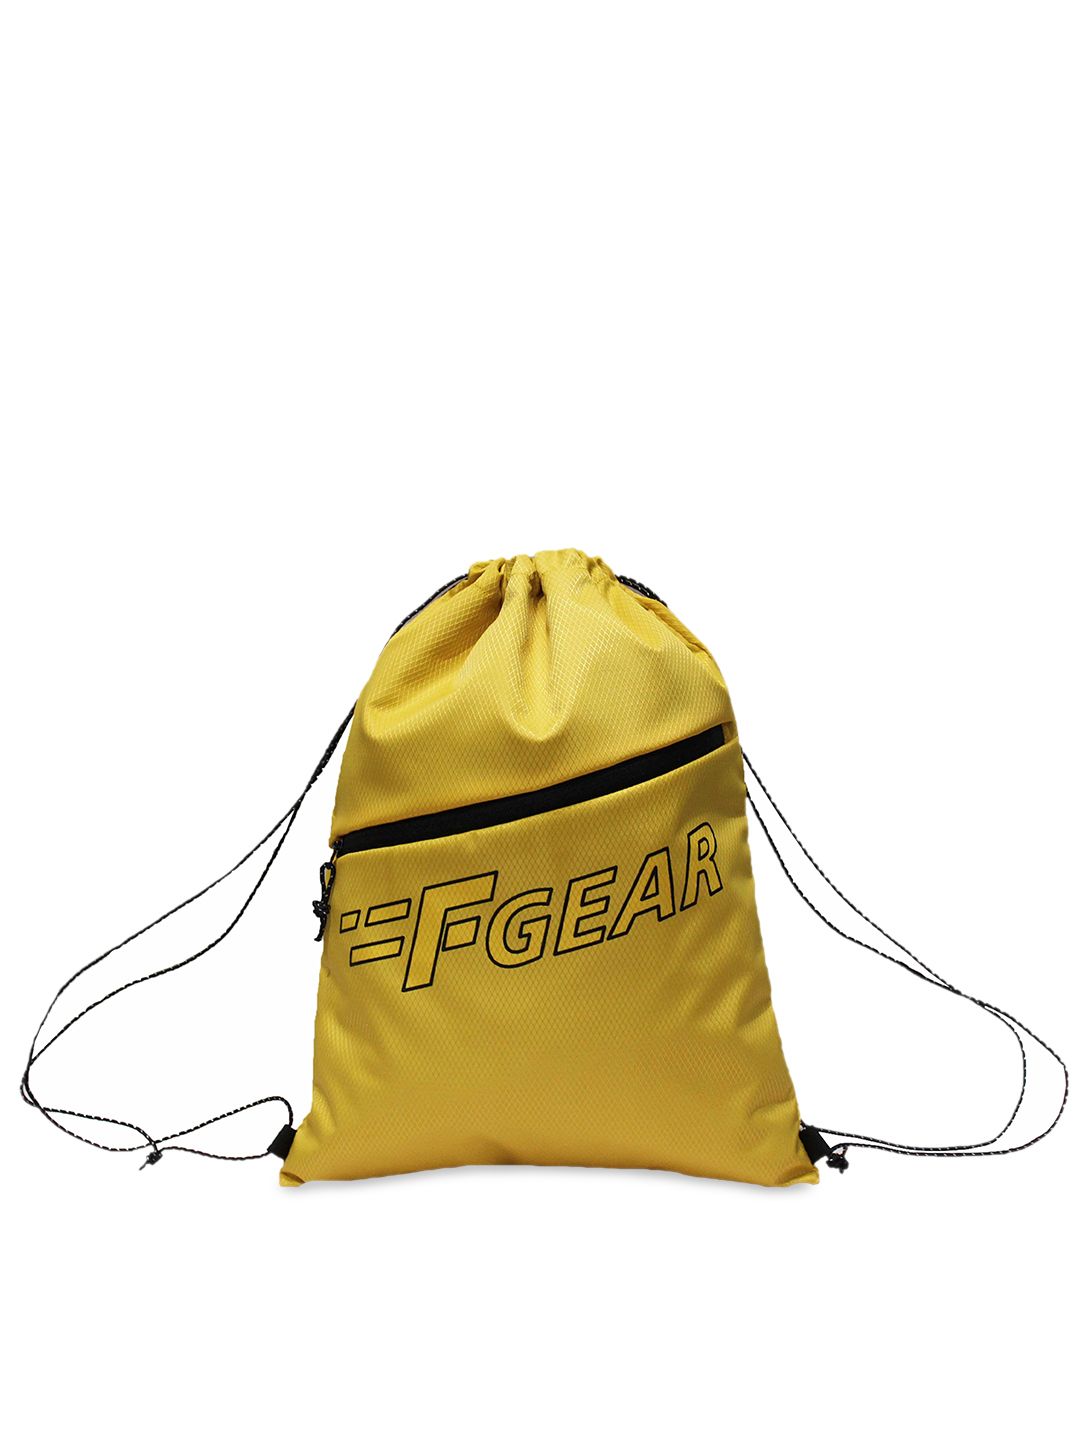 F Gear Unisex Yellow & Black Printed Backpack Price in India